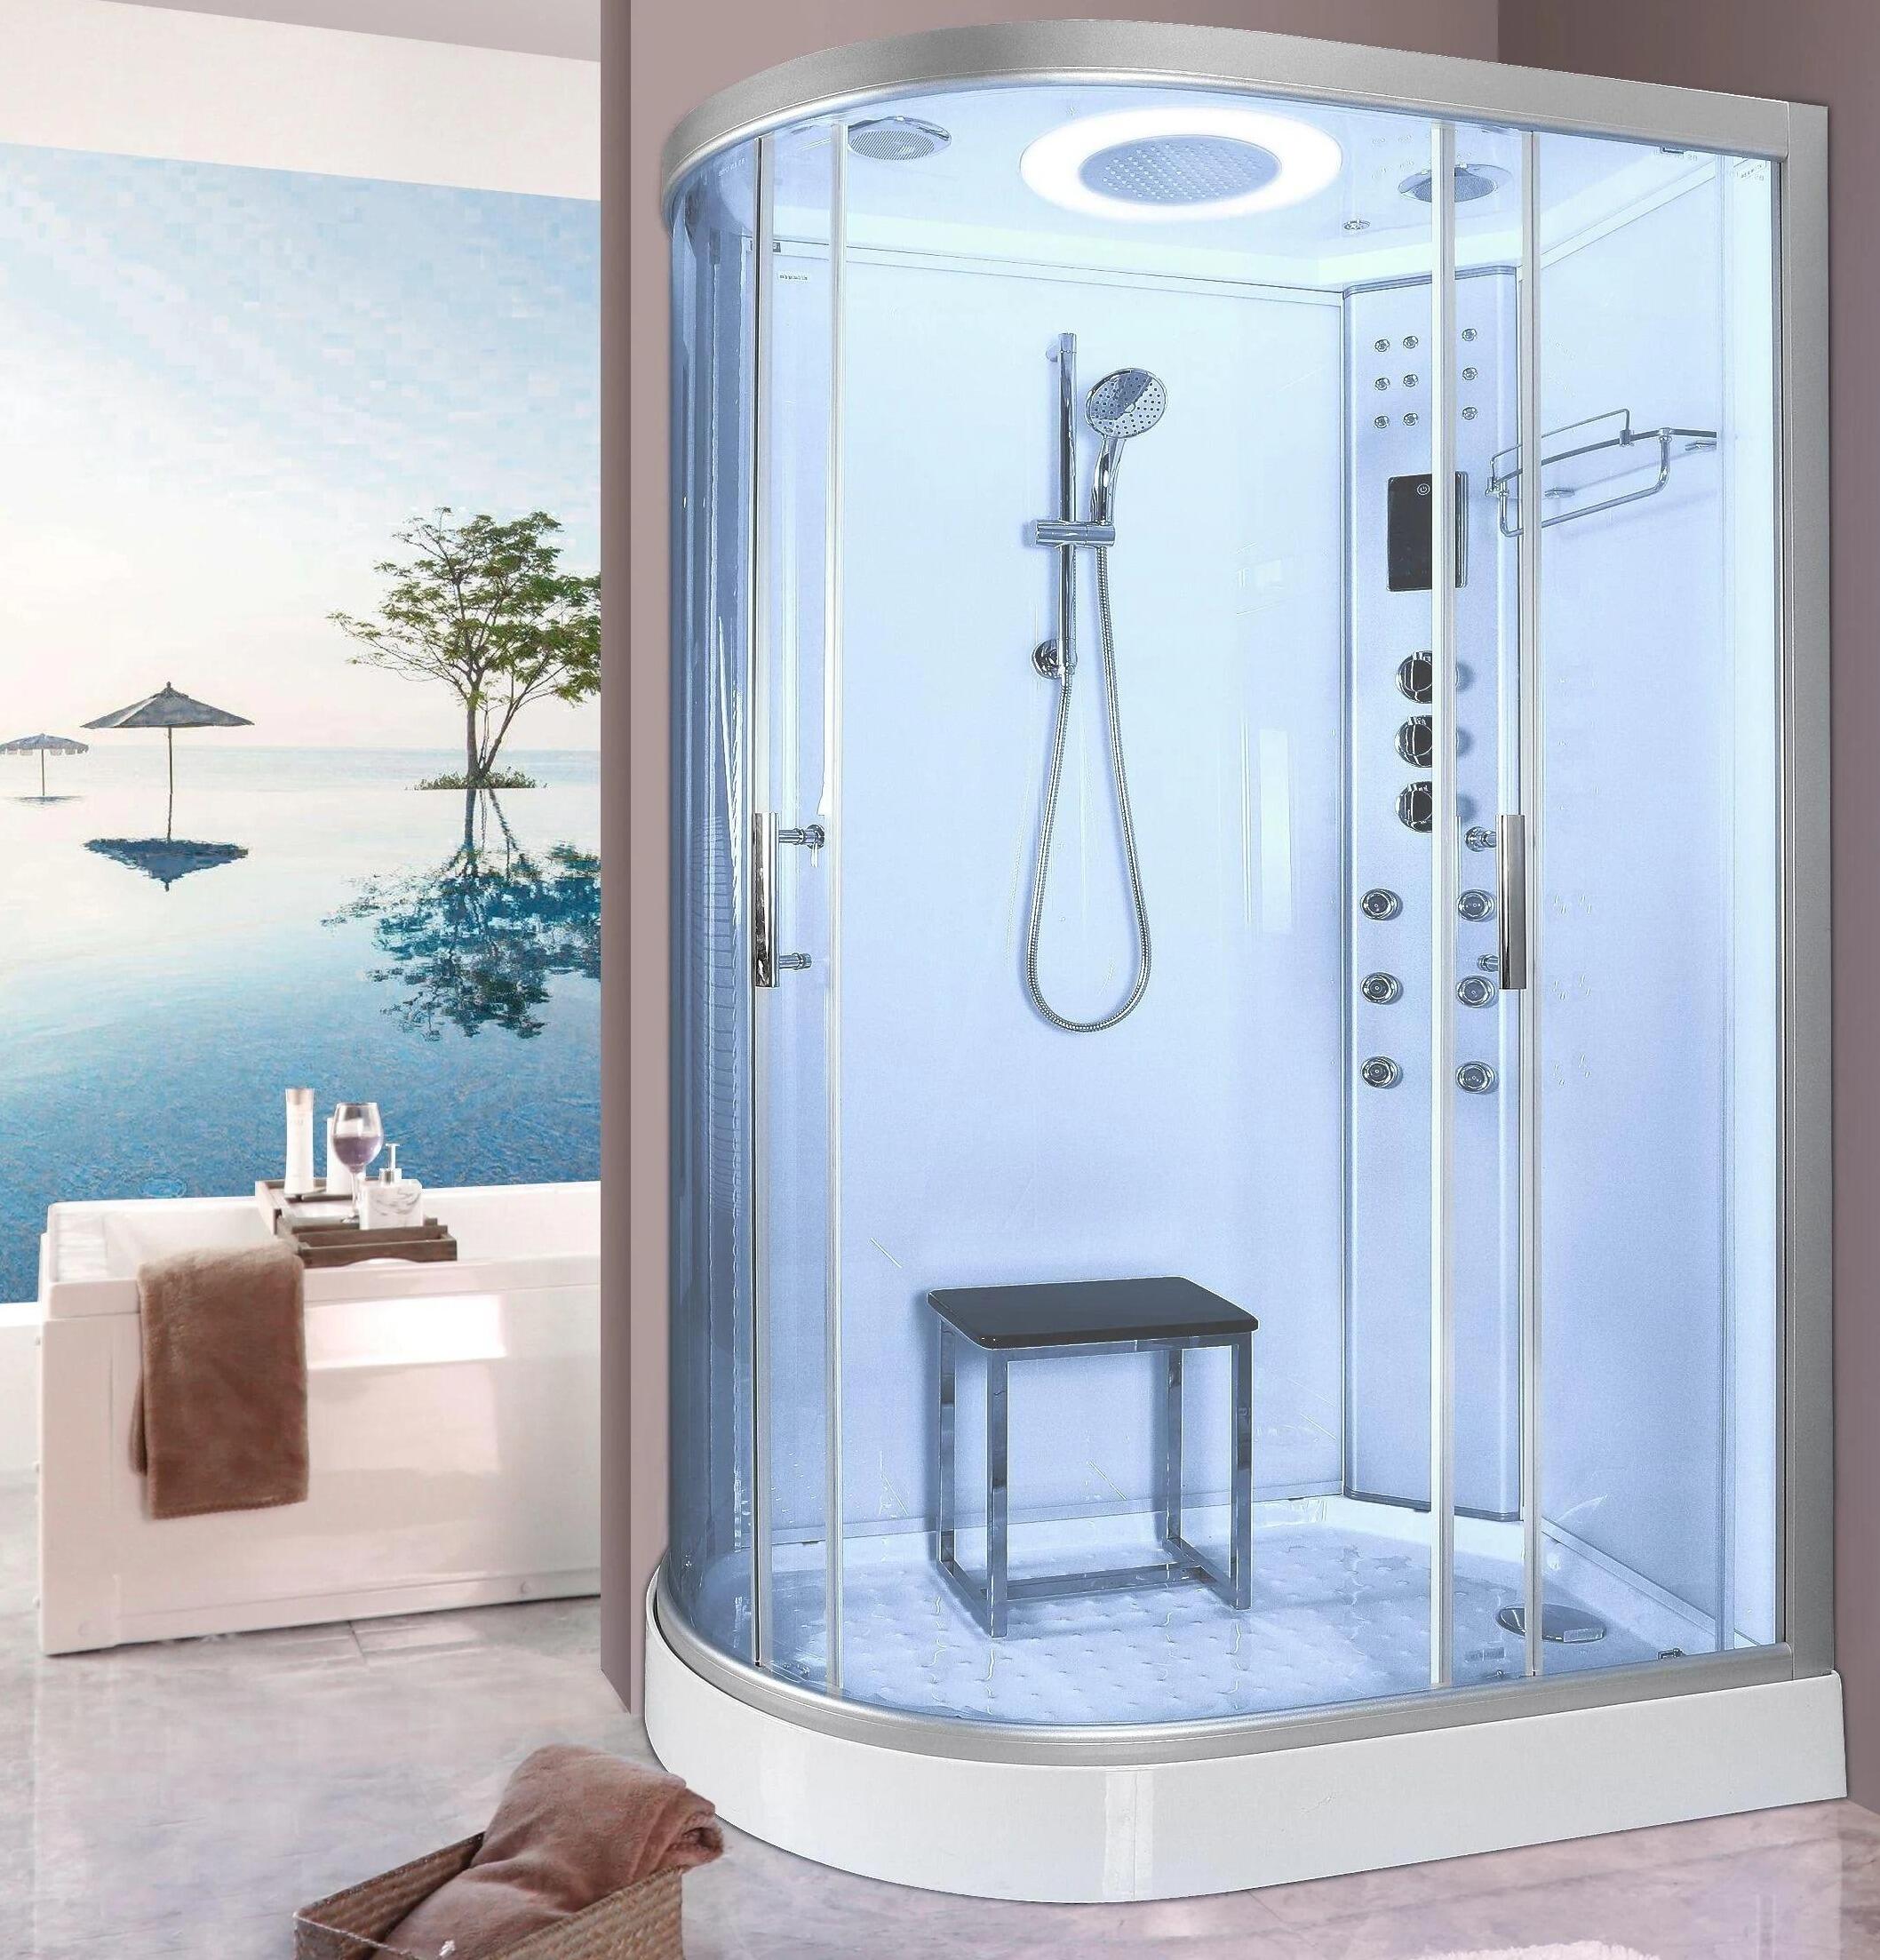 https://cdn.ecommercedns.uk/files/3/234443/1/35151731/lisna-waters-lw18-1200-x-800-steam-shower-cabin-right-handed-whi.jpg